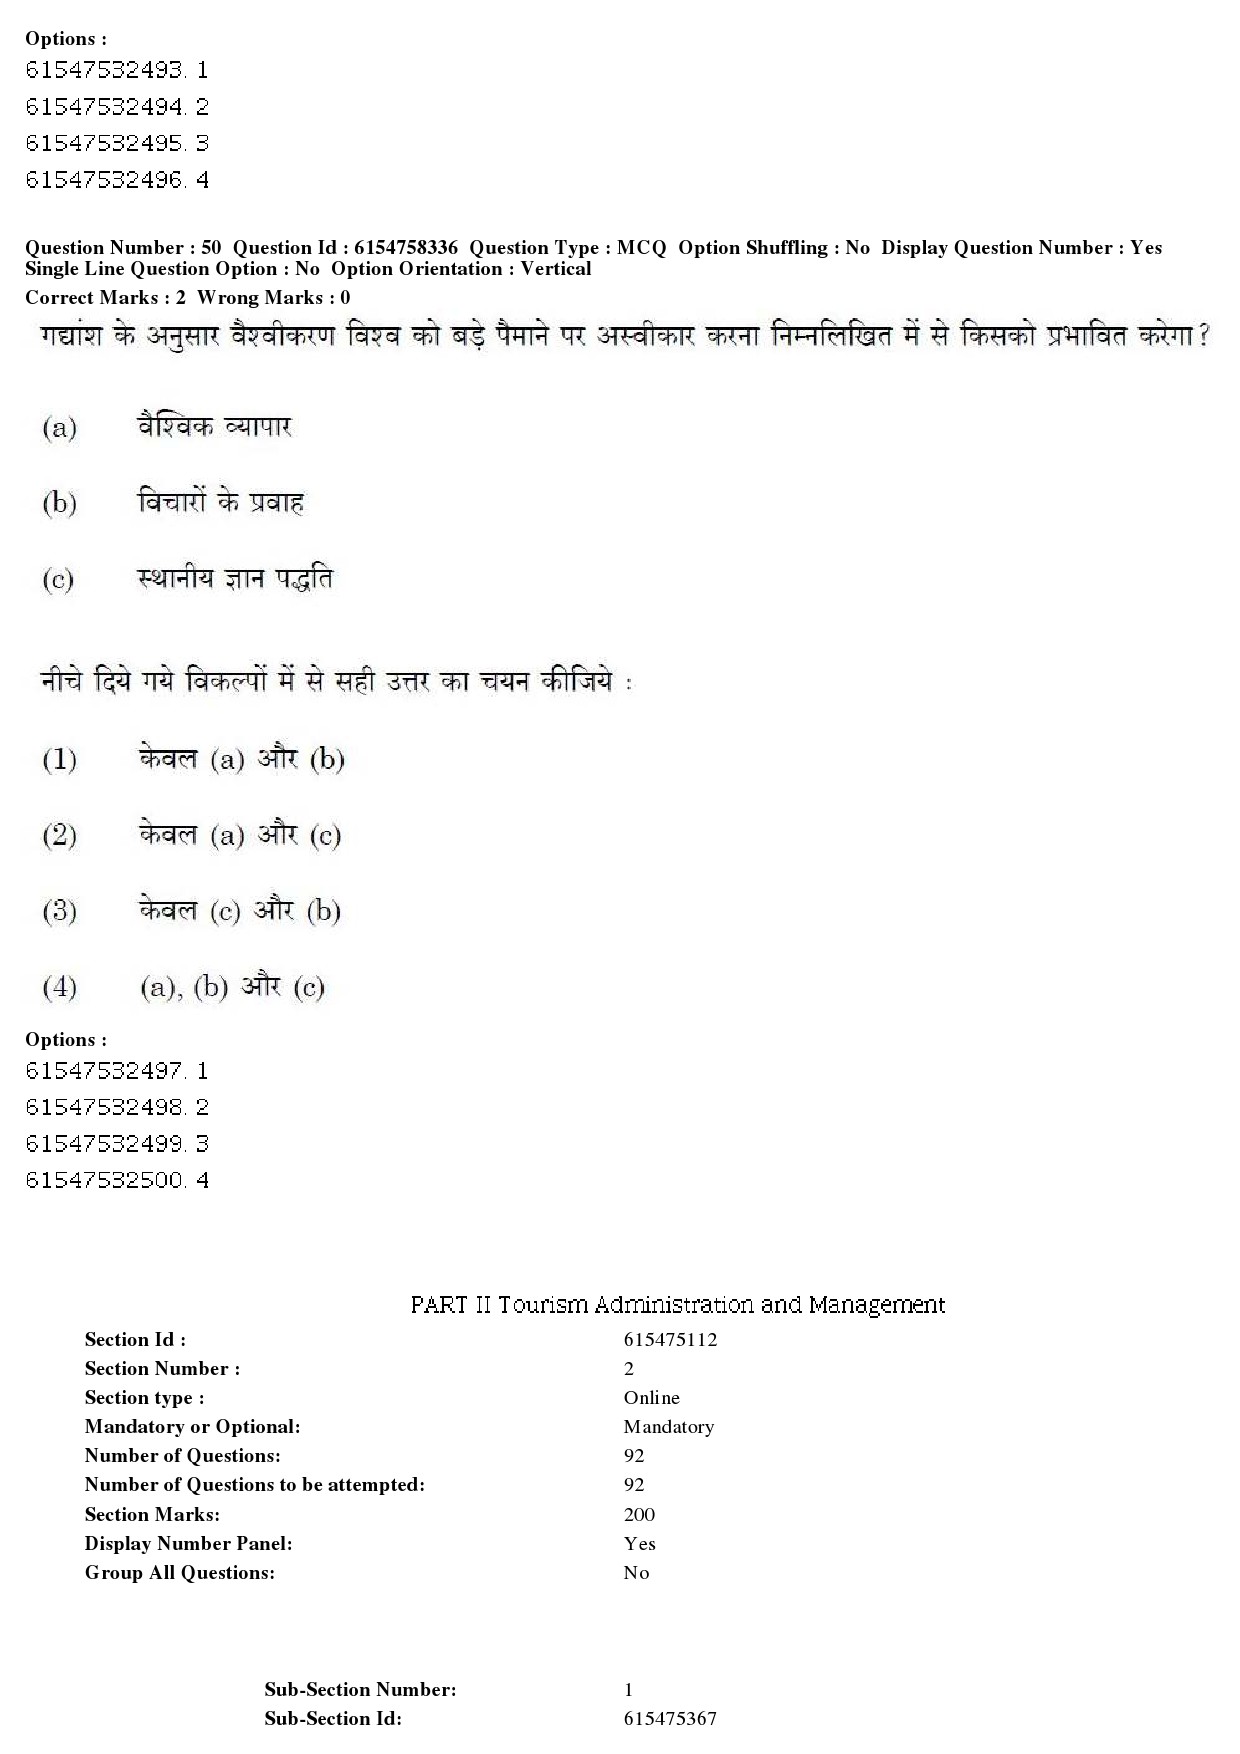 UGC NET Tourism Administration And Management Question Paper December 2019 53